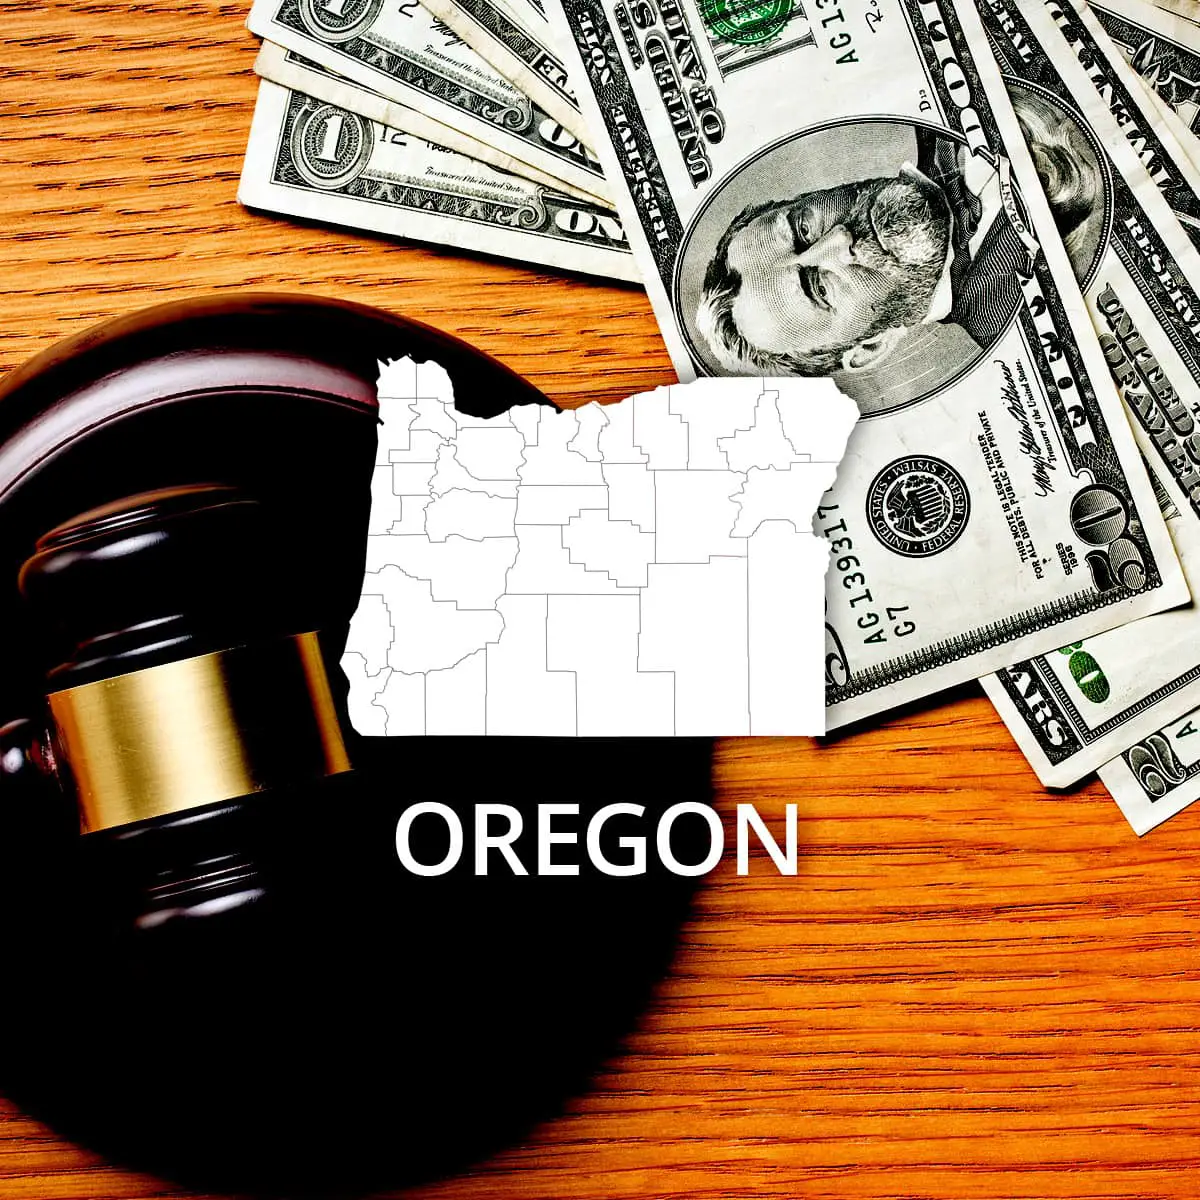 How to File Bankruptcy in Oregon